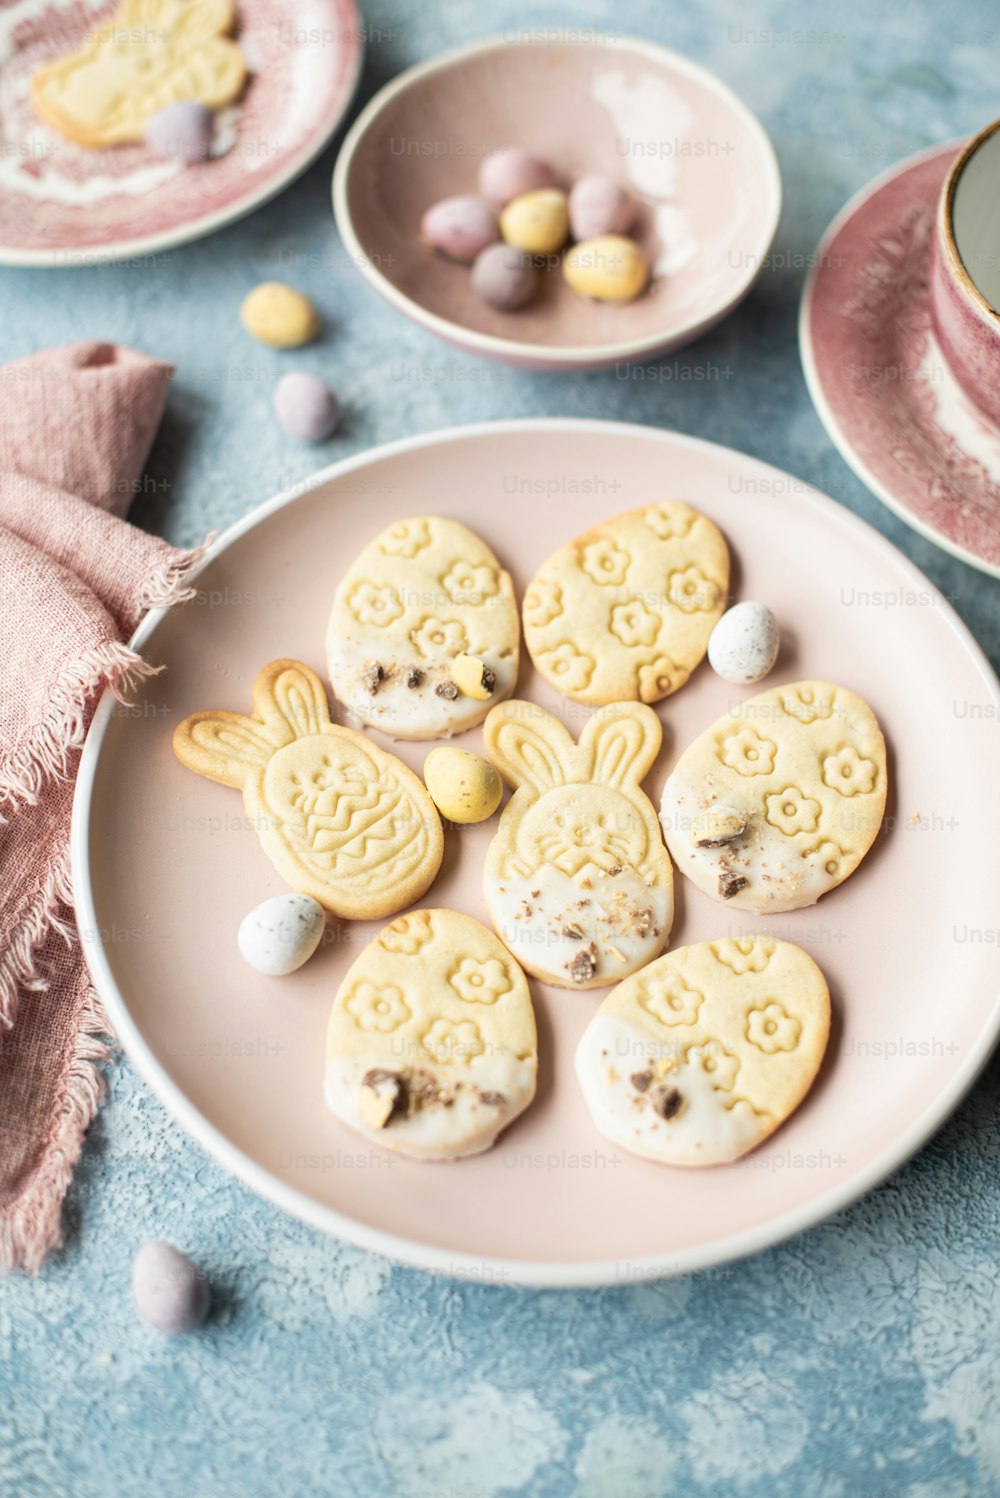 a plate of cookies with bunny ears on them